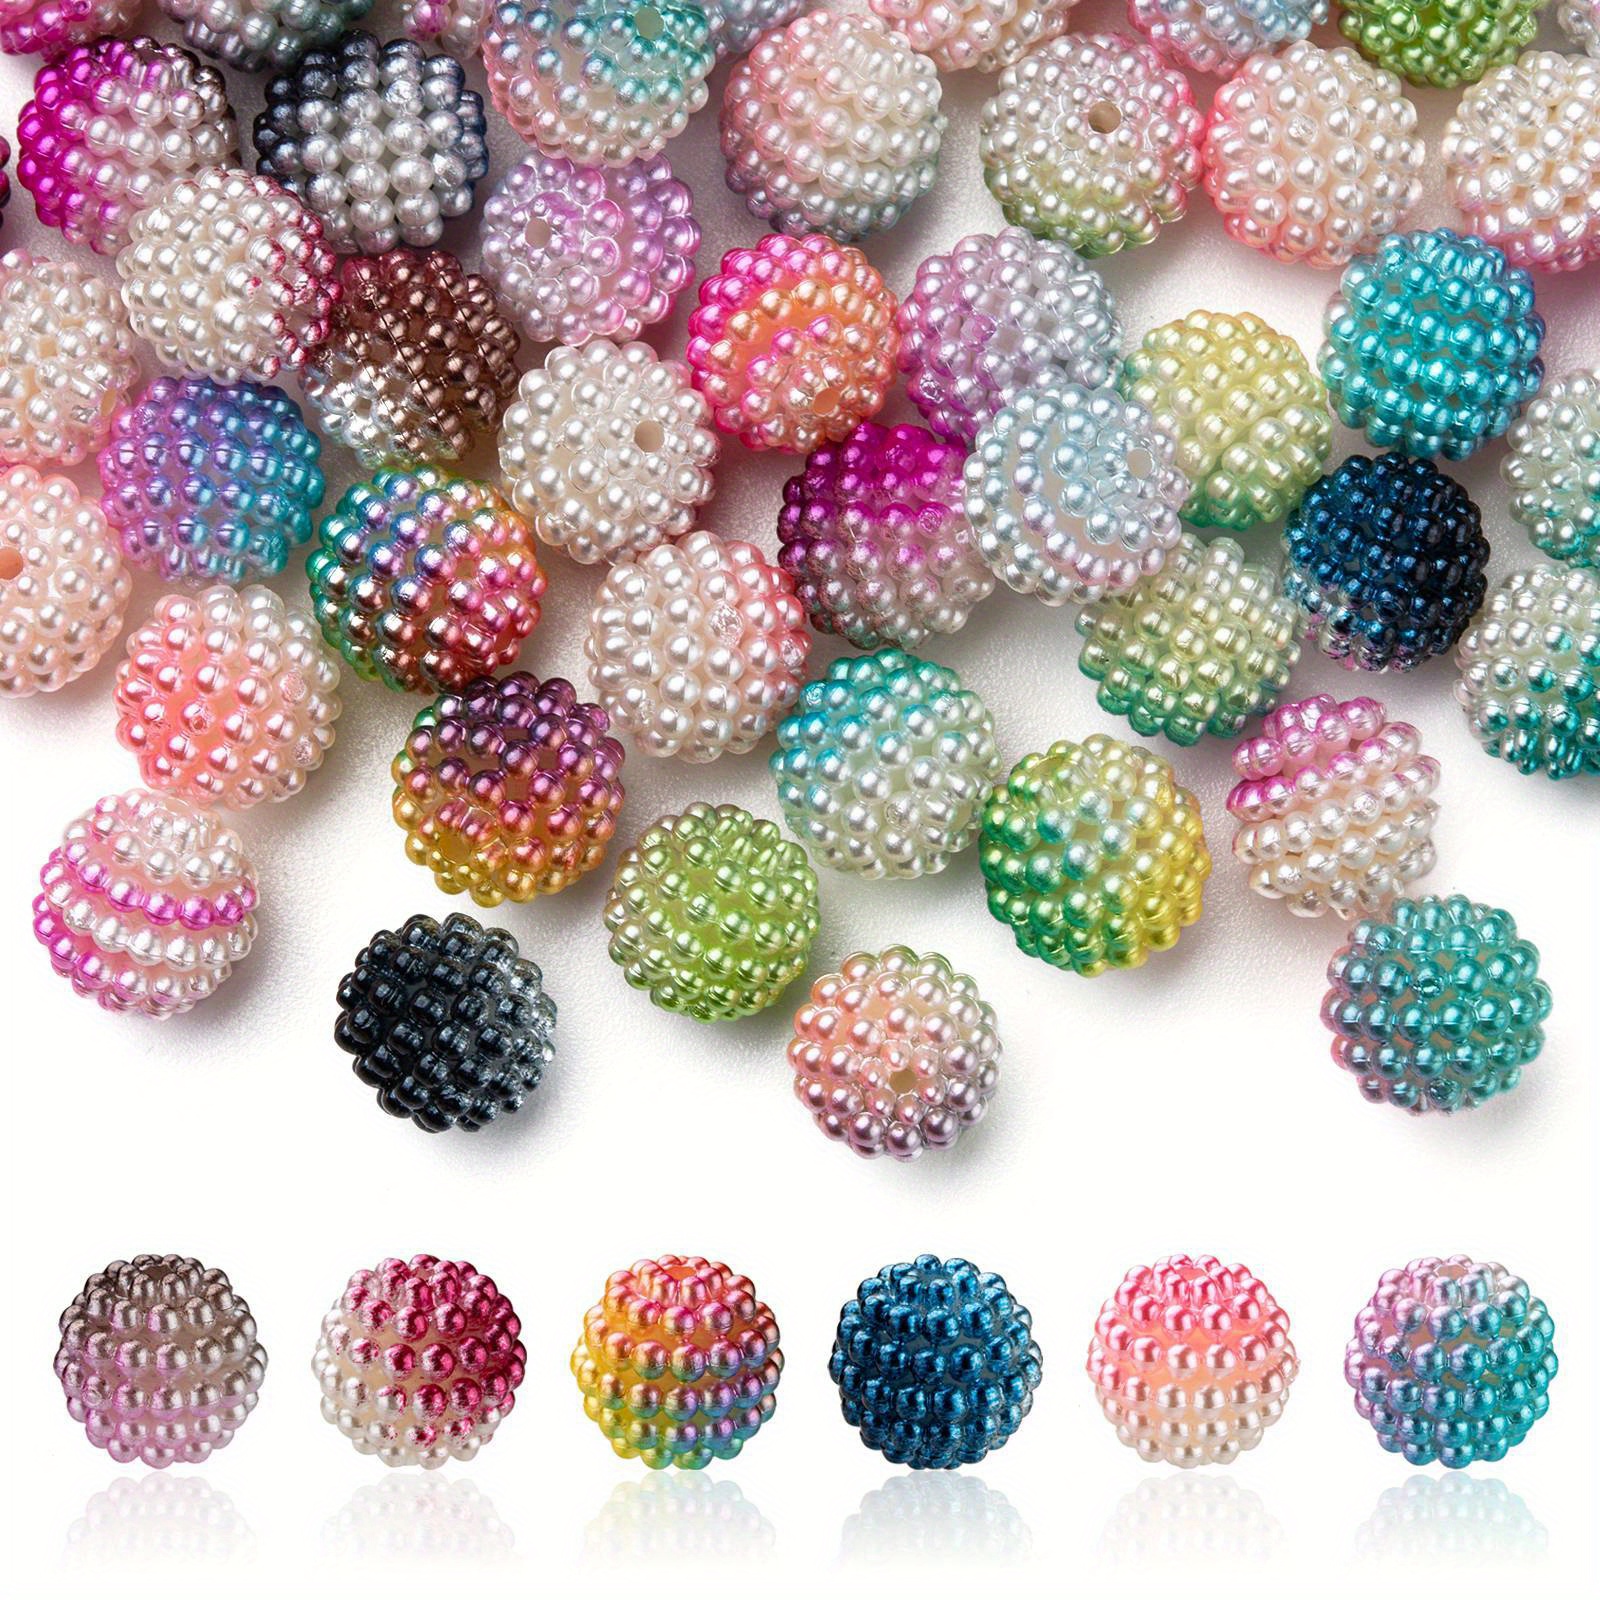 100 Qty 12mm Beads, Colorful Mixed Beads, Acrylic Beads, Chunky Bubblegum  Beads in Bulk, Round beads, Beading Supply, Loose Beads, Crafting